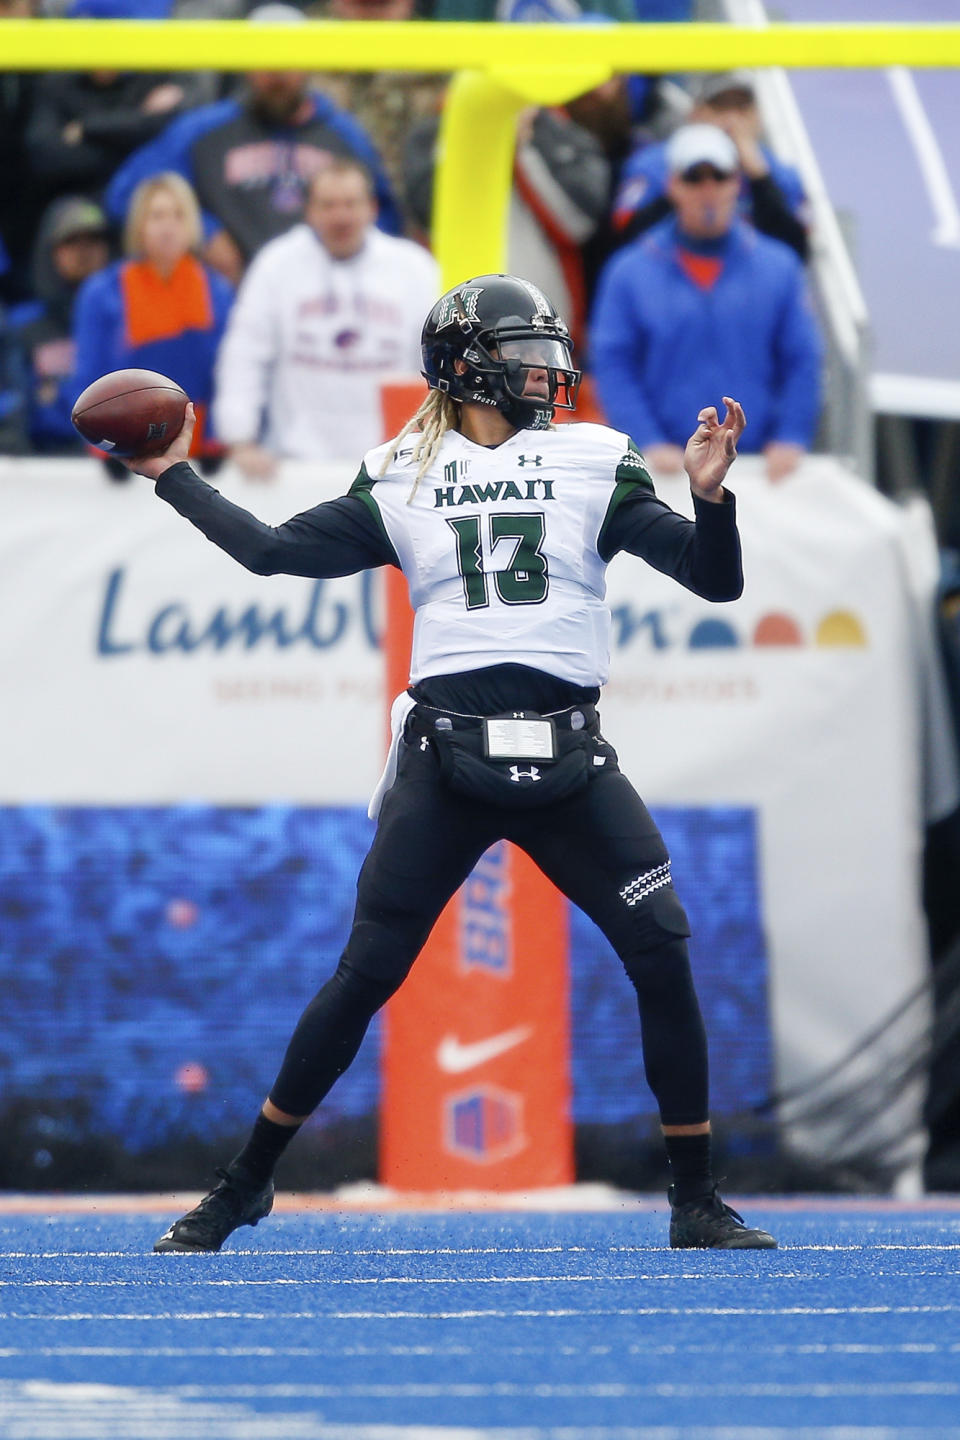 Hawaii quarterback Cole McDonald (13) looks to throw the ball against Boise State during the first half of an NCAA college football game for the Mountain West Championship Saturday, Dec. 7, 2019, in Boise, Idaho. (AP Photo/Steve Conner)